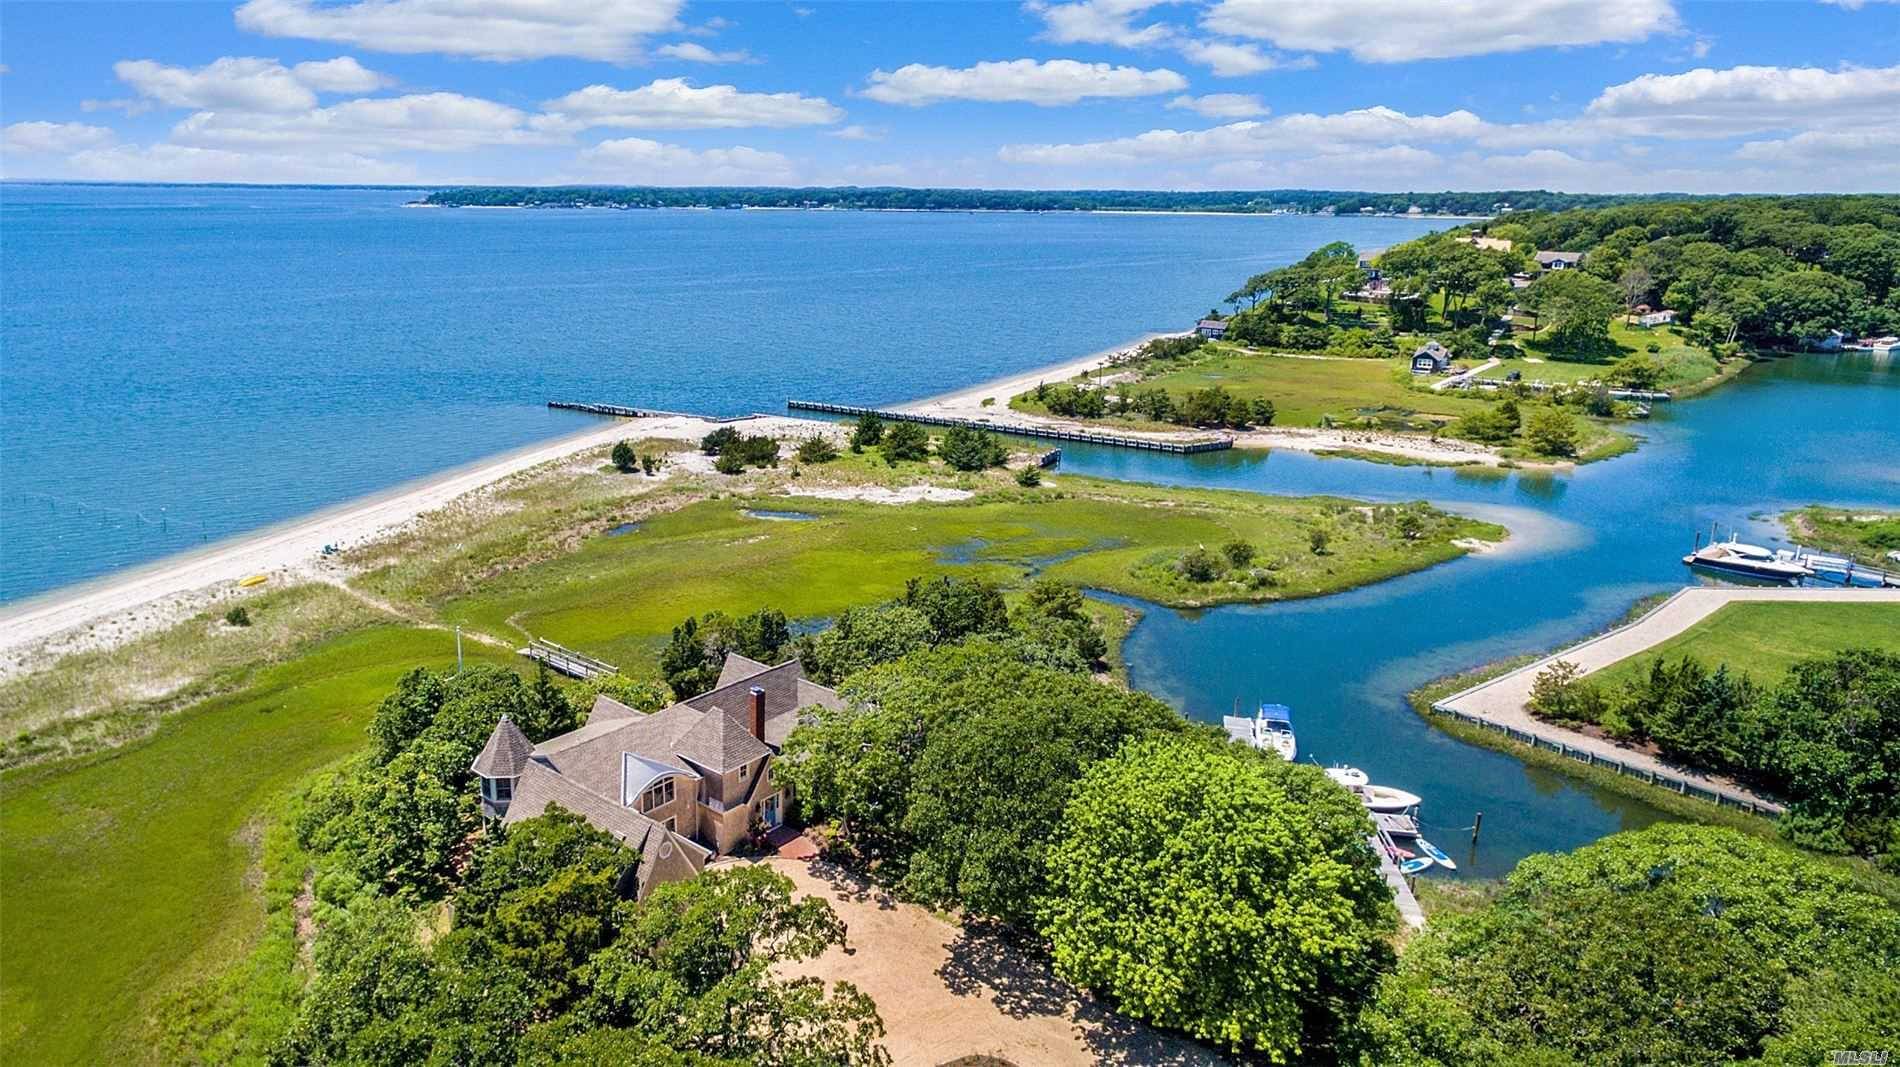 Over the wooden bridge, ensconced in the natural environment of the Great Peconic Bay, a sandy beach, and lush wetlands, Bridges to Bliss blends seamlessly into the landscape.